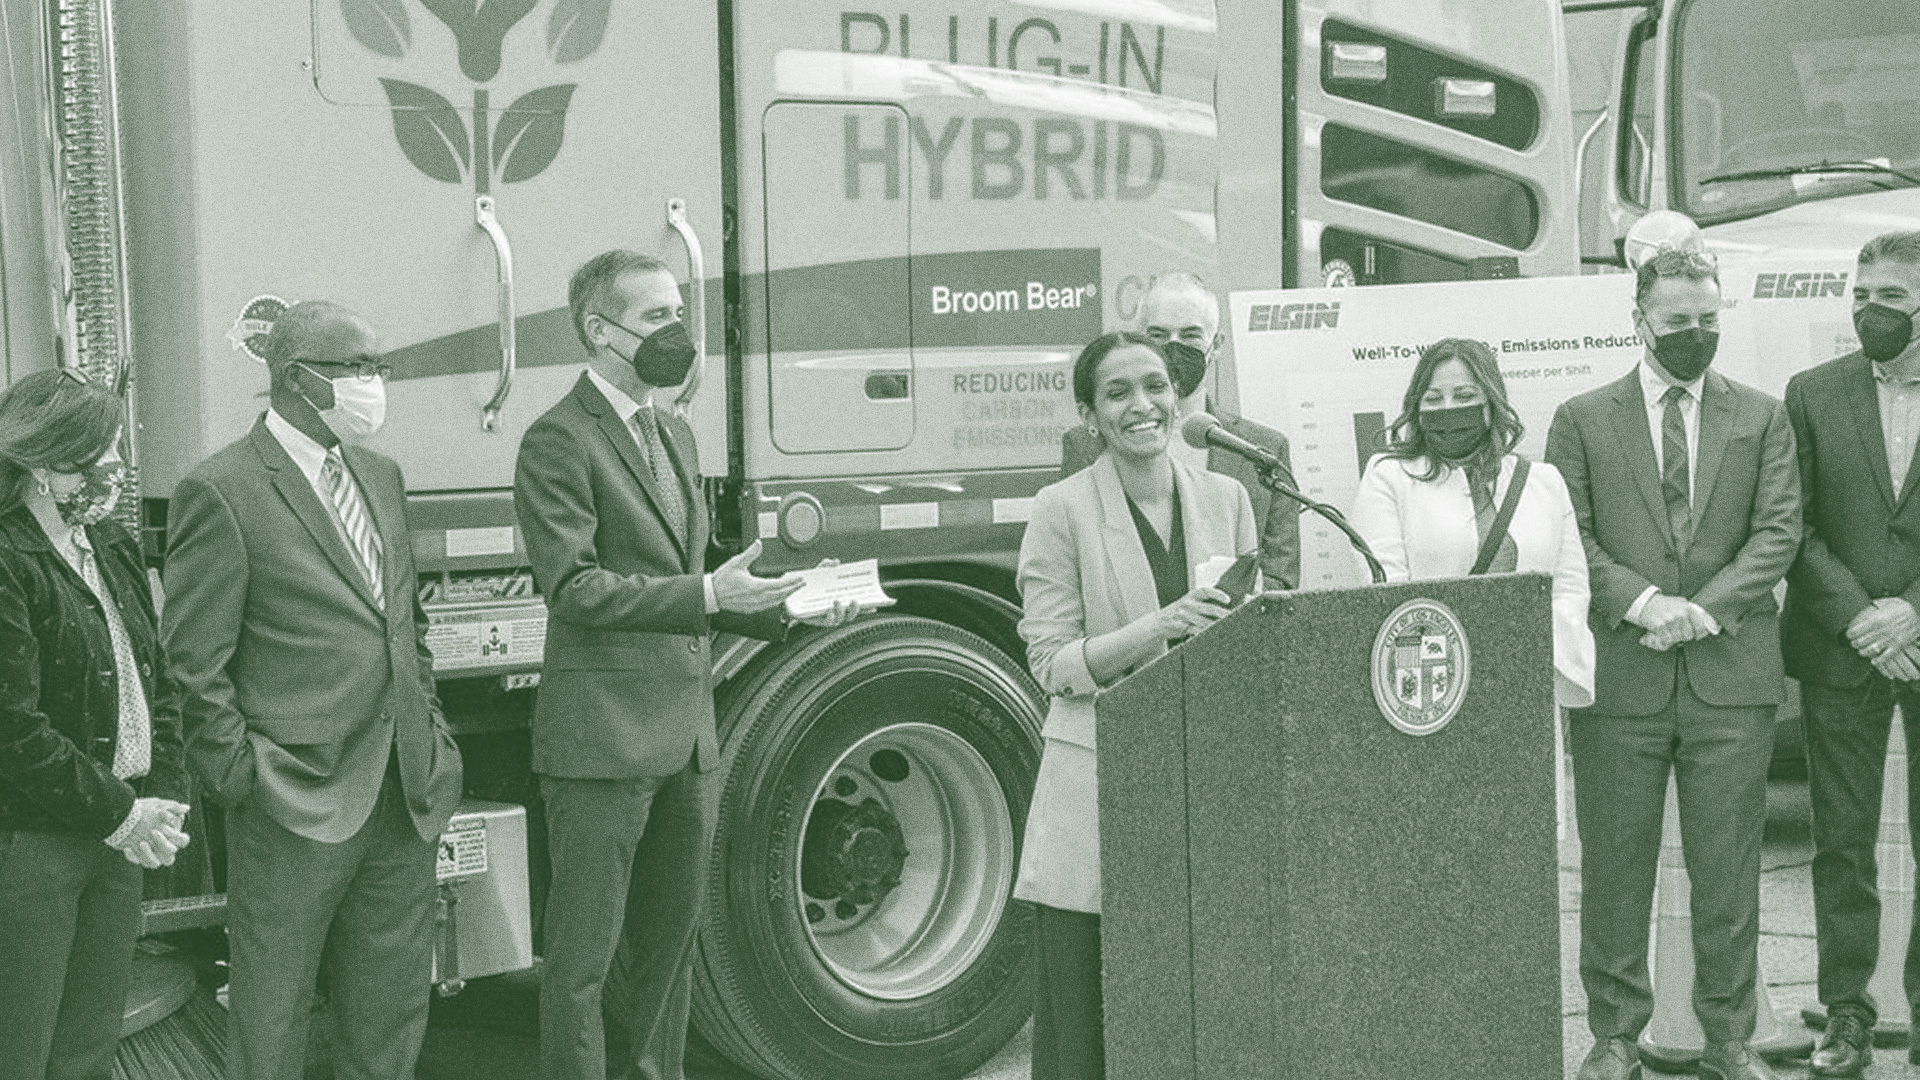 Nithya Raman making speech with plug-in hybrid truck in background